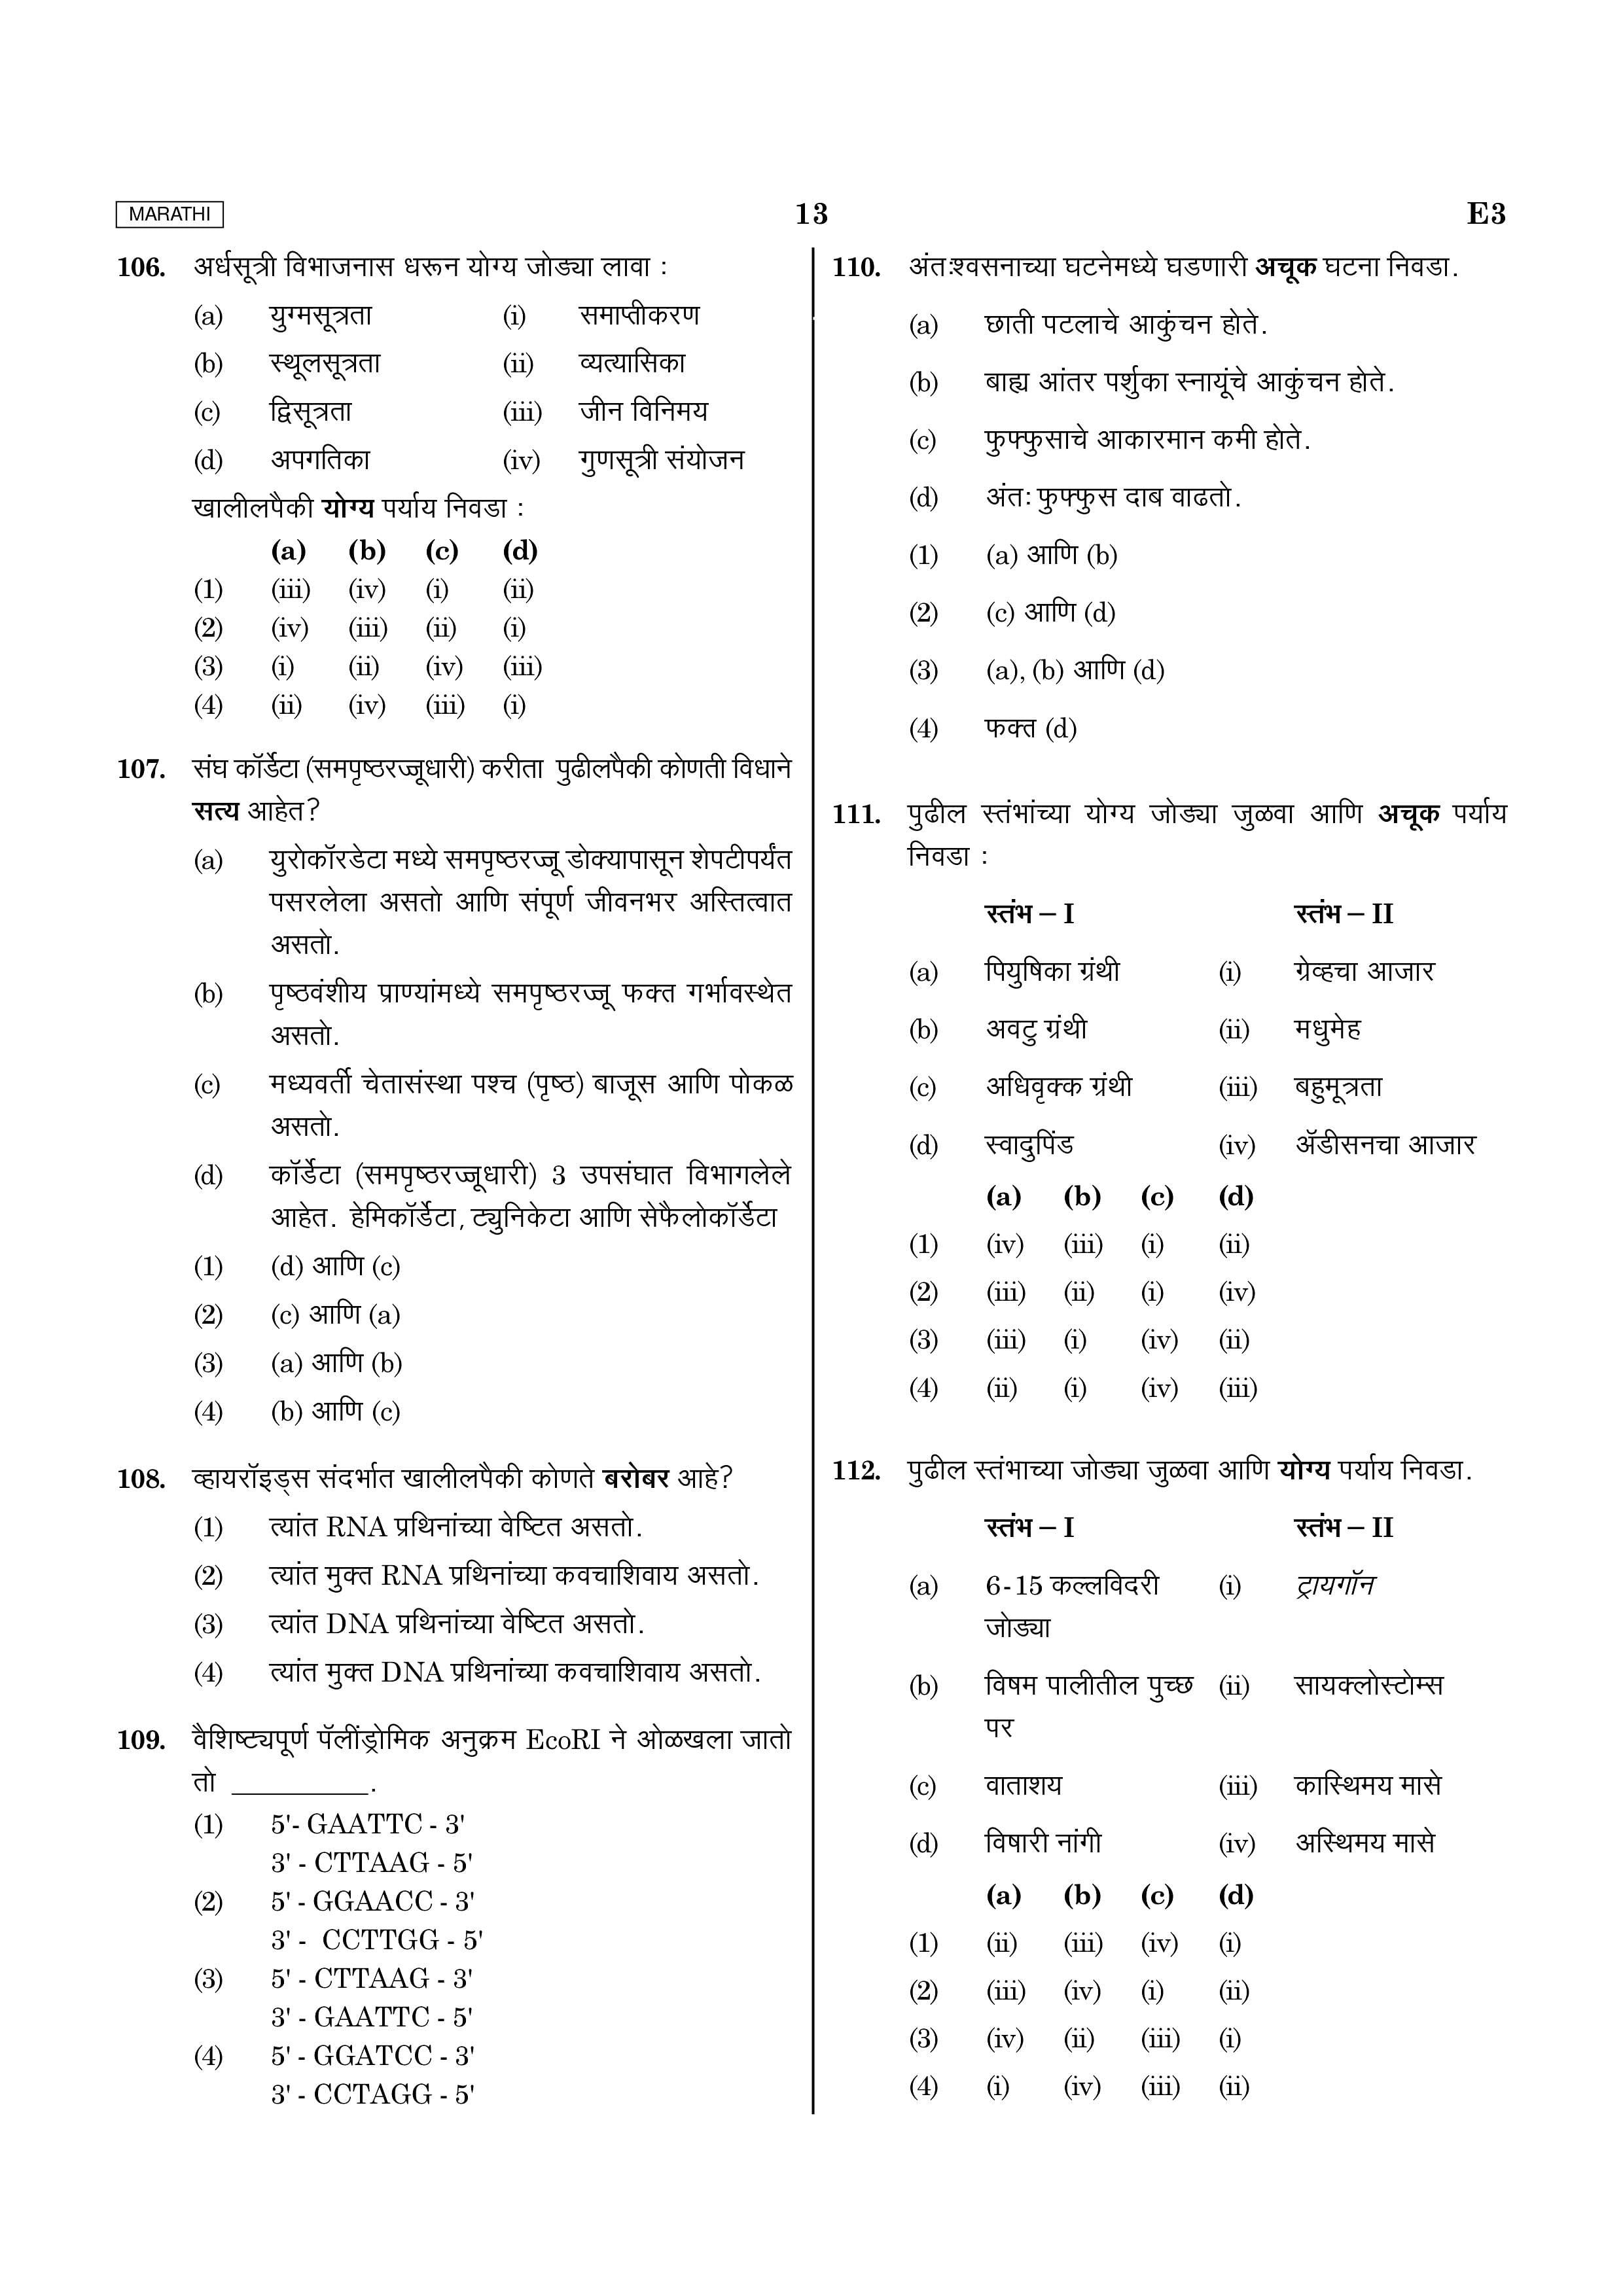 NEET 2020 Question Paper with Answer Key PDF in Marathi for E3 to H3